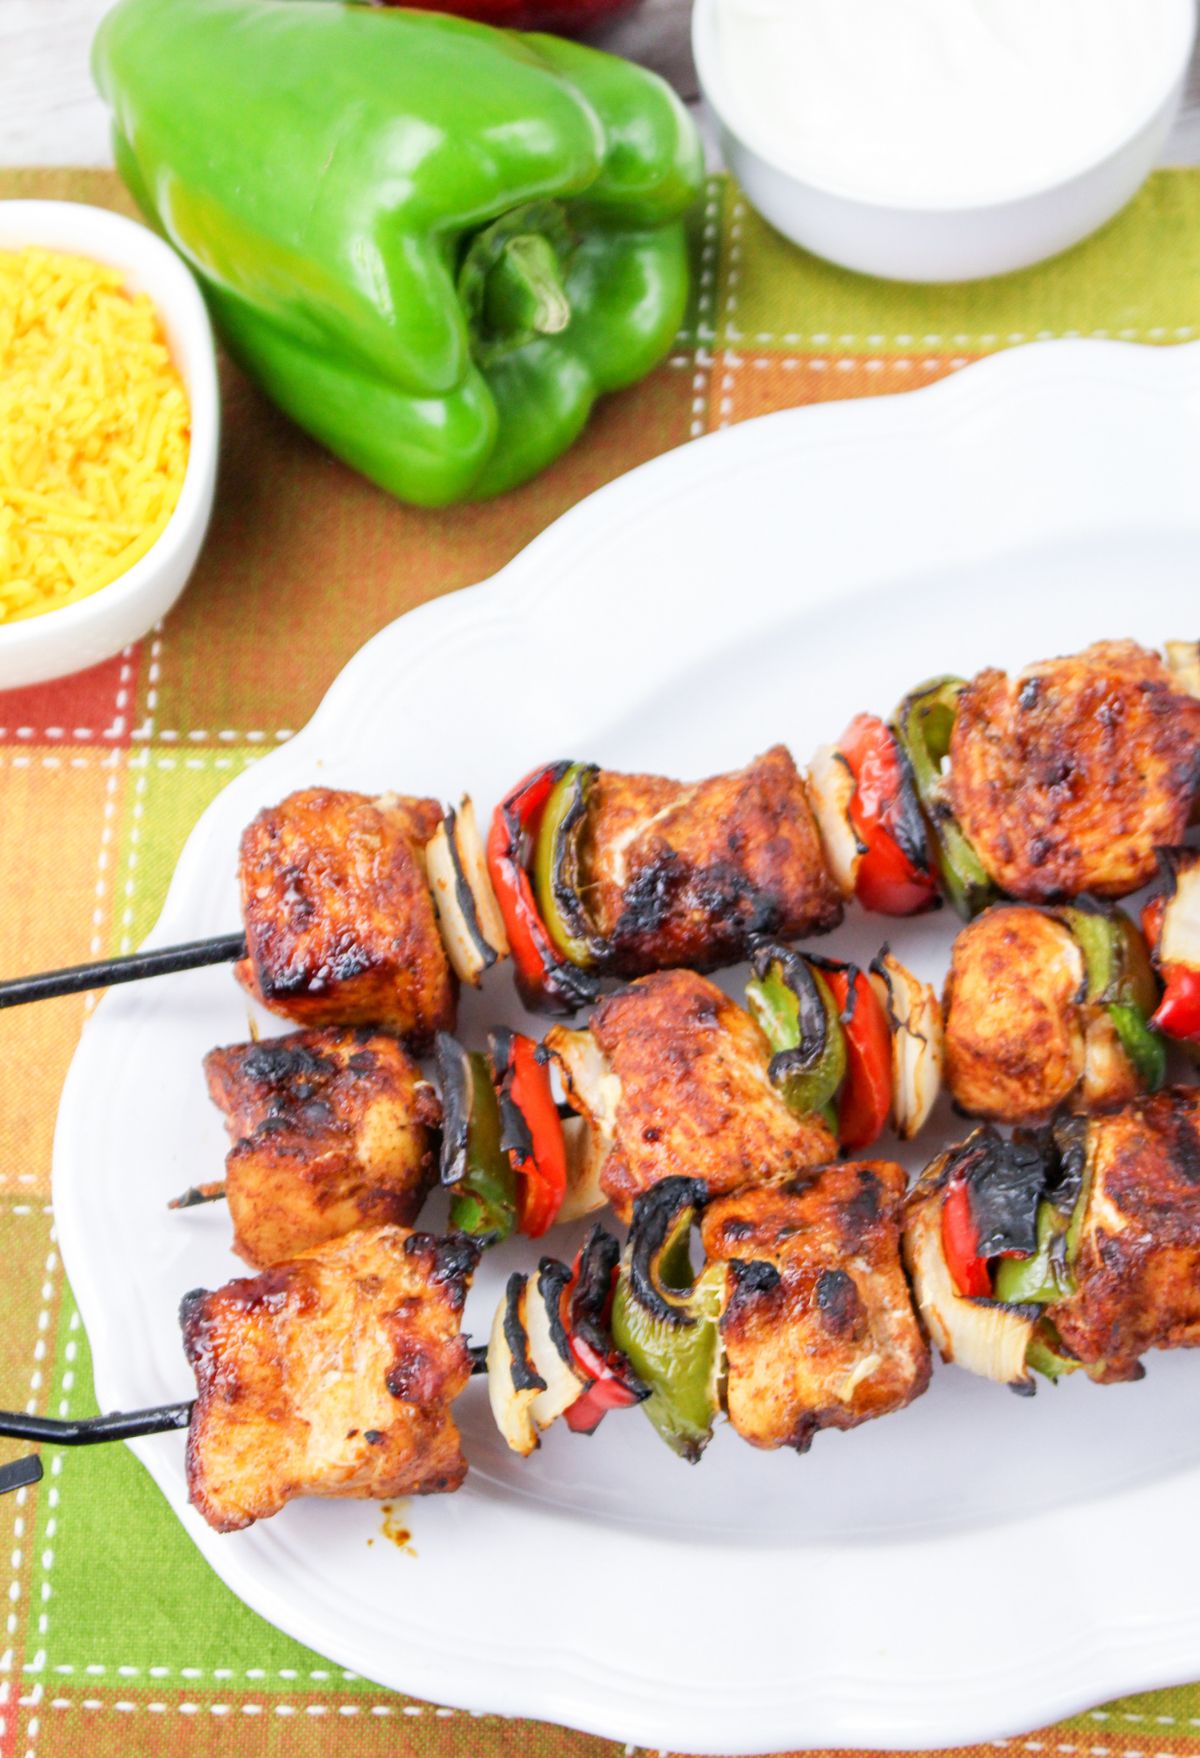 Chicken skewers on a plate with peppers and onions.